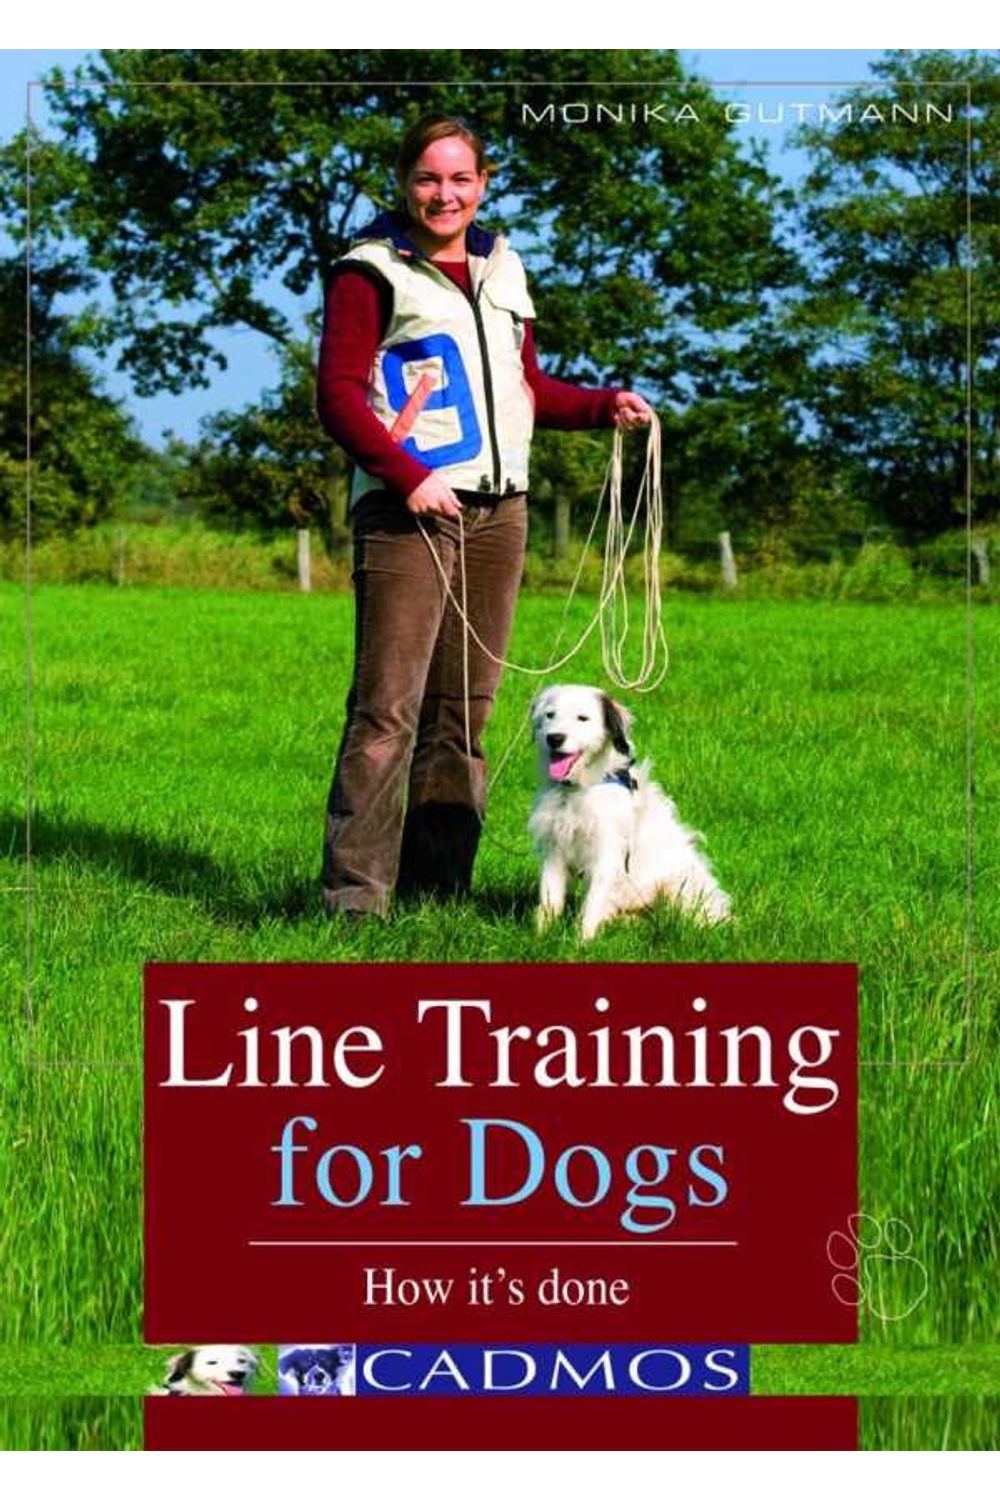 bw-line-training-for-dogs-cadmos-publishing-9780857886644